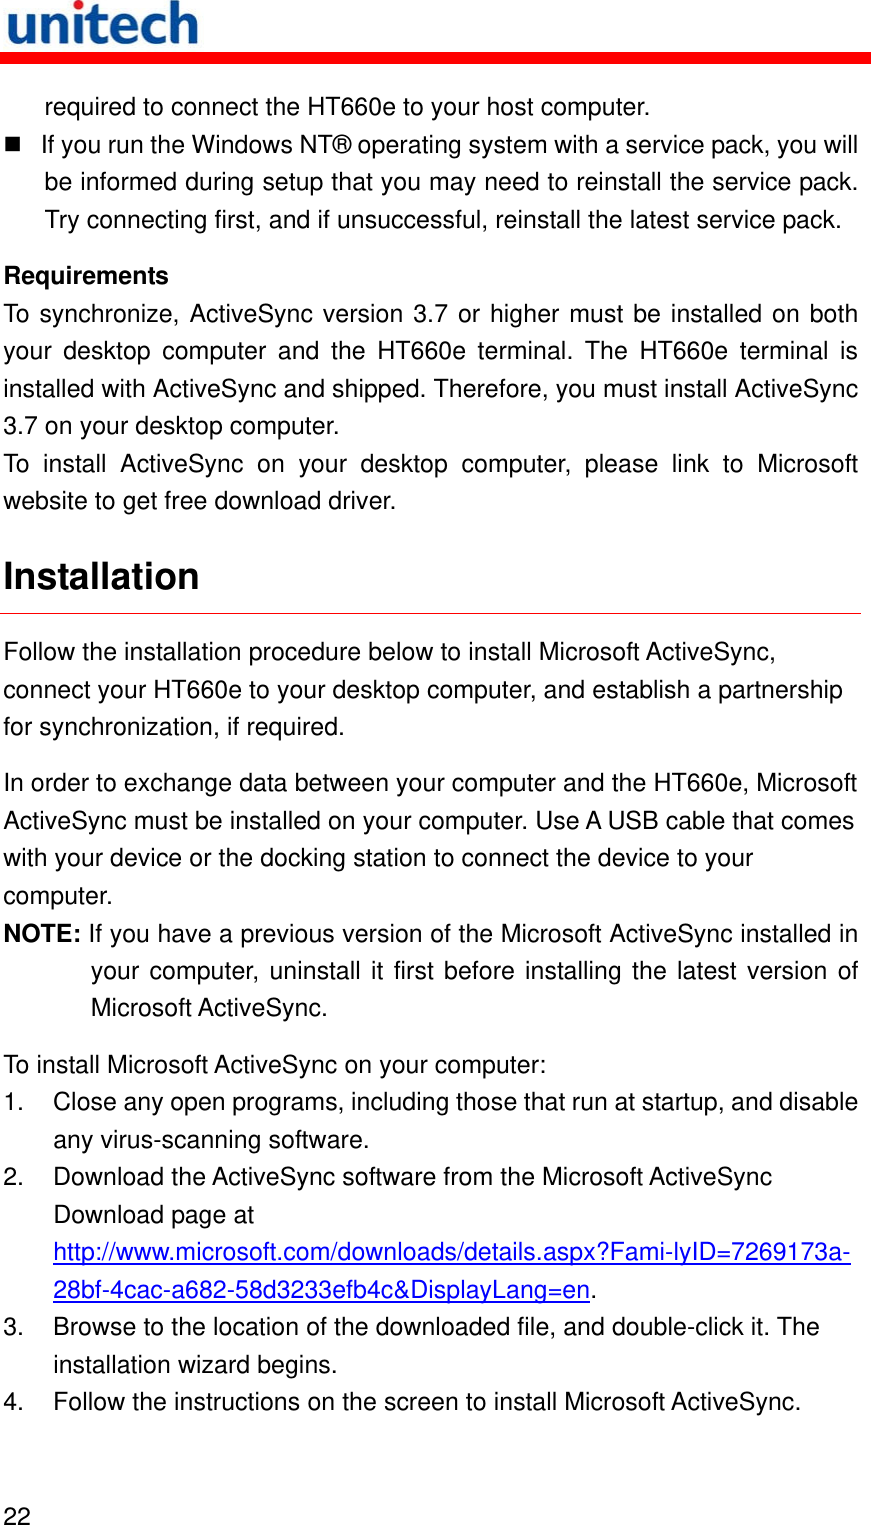   22  required to connect the HT660e to your host computer.  If you run the Windows NT® operating system with a service pack, you will be informed during setup that you may need to reinstall the service pack. Try connecting first, and if unsuccessful, reinstall the latest service pack. Requirements To synchronize, ActiveSync version 3.7 or higher must be installed on both your desktop computer and the HT660e terminal. The HT660e terminal is installed with ActiveSync and shipped. Therefore, you must install ActiveSync 3.7 on your desktop computer. To install ActiveSync on your desktop computer, please link to Microsoft website to get free download driver. Installation Follow the installation procedure below to install Microsoft ActiveSync, connect your HT660e to your desktop computer, and establish a partnership for synchronization, if required. In order to exchange data between your computer and the HT660e, Microsoft ActiveSync must be installed on your computer. Use A USB cable that comes with your device or the docking station to connect the device to your computer. NOTE: If you have a previous version of the Microsoft ActiveSync installed in your computer, uninstall it first before installing the latest version of Microsoft ActiveSync. To install Microsoft ActiveSync on your computer: 1.  Close any open programs, including those that run at startup, and disable any virus-scanning software. 2.  Download the ActiveSync software from the Microsoft ActiveSync Download page at http://www.microsoft.com/downloads/details.aspx?Fami-lyID=7269173a-28bf-4cac-a682-58d3233efb4c&amp;DisplayLang=en. 3.  Browse to the location of the downloaded file, and double-click it. The installation wizard begins. 4.  Follow the instructions on the screen to install Microsoft ActiveSync. 